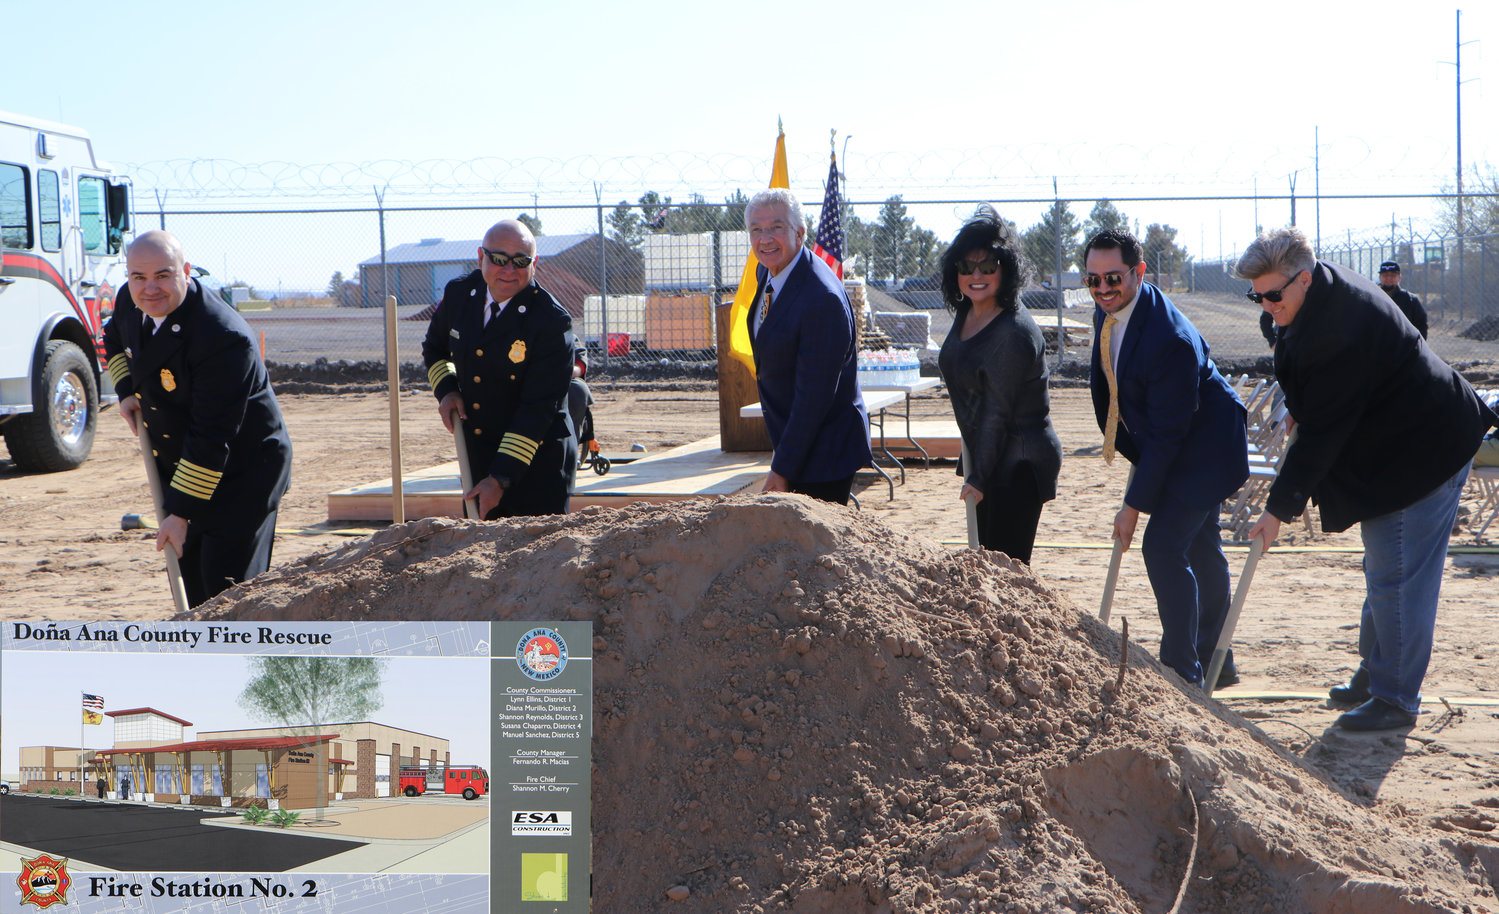 Left to right are Doña Ana County Fire Chief Shannon Cherry, county Deputy Fire Chief Eric Crespin, County Manager Fernando Macias, state Rep. Doreen Gallegos, Asst. County Manager Jonathan Macias and state Sen. Carrie Hamblen.